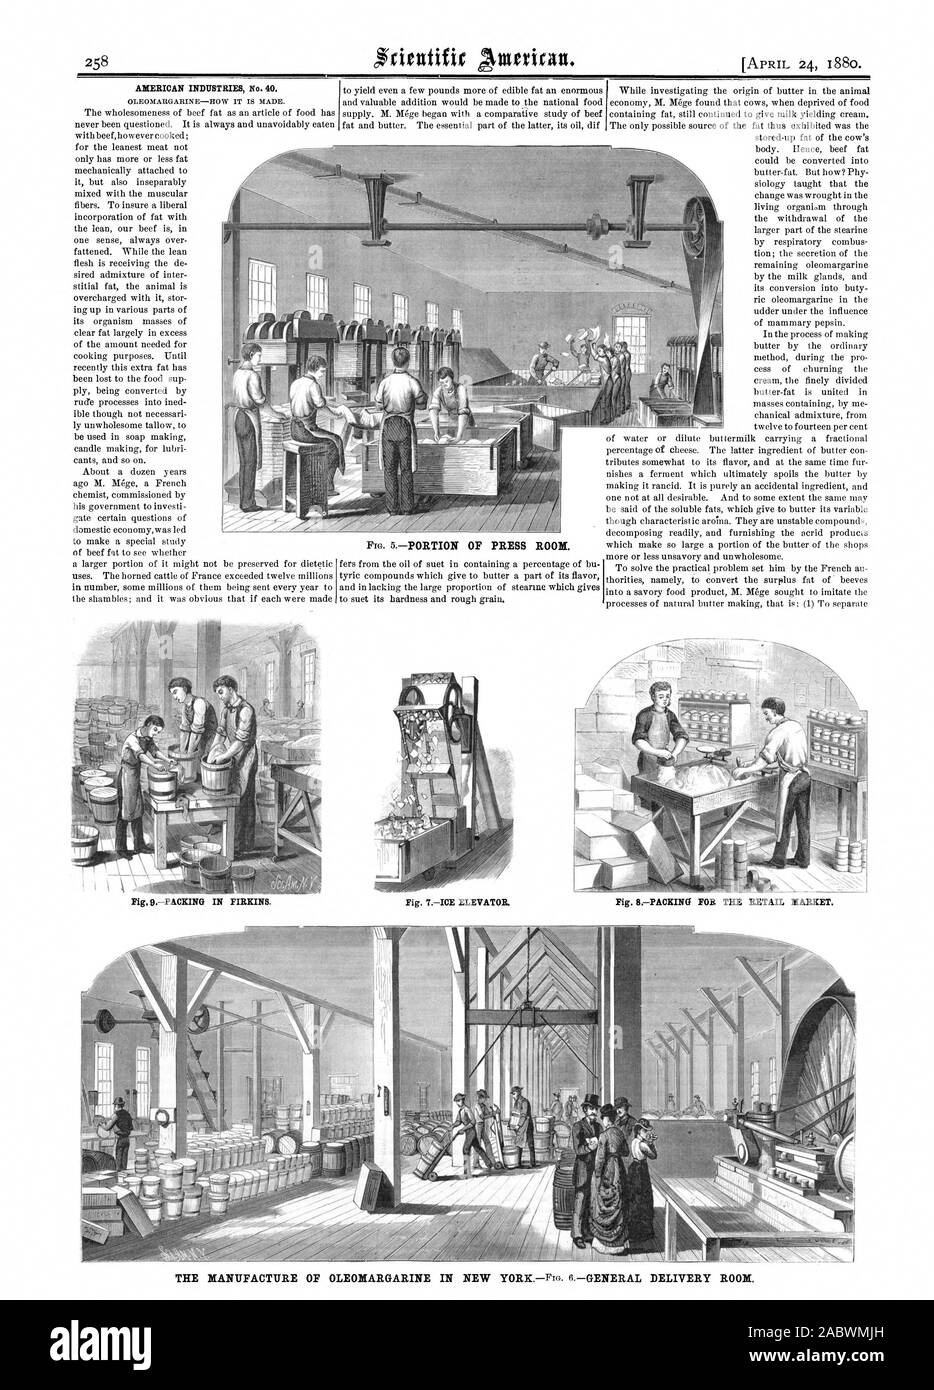 AMERICAN INDUSTRIES No. 40. OLEOMARGARINE-HOW IT IS MADE. FIG. 5. PORTION OF PRESS ROOM. Fig. SPACKING FOR THE RETAIL MARKET. THE MANUFACTURE OF OLEOMARGARINE IN NEW YORK—FIG. 6—GENERAL DELIVERY ROOM., scientific american, 1880-04-24 Stock Photo